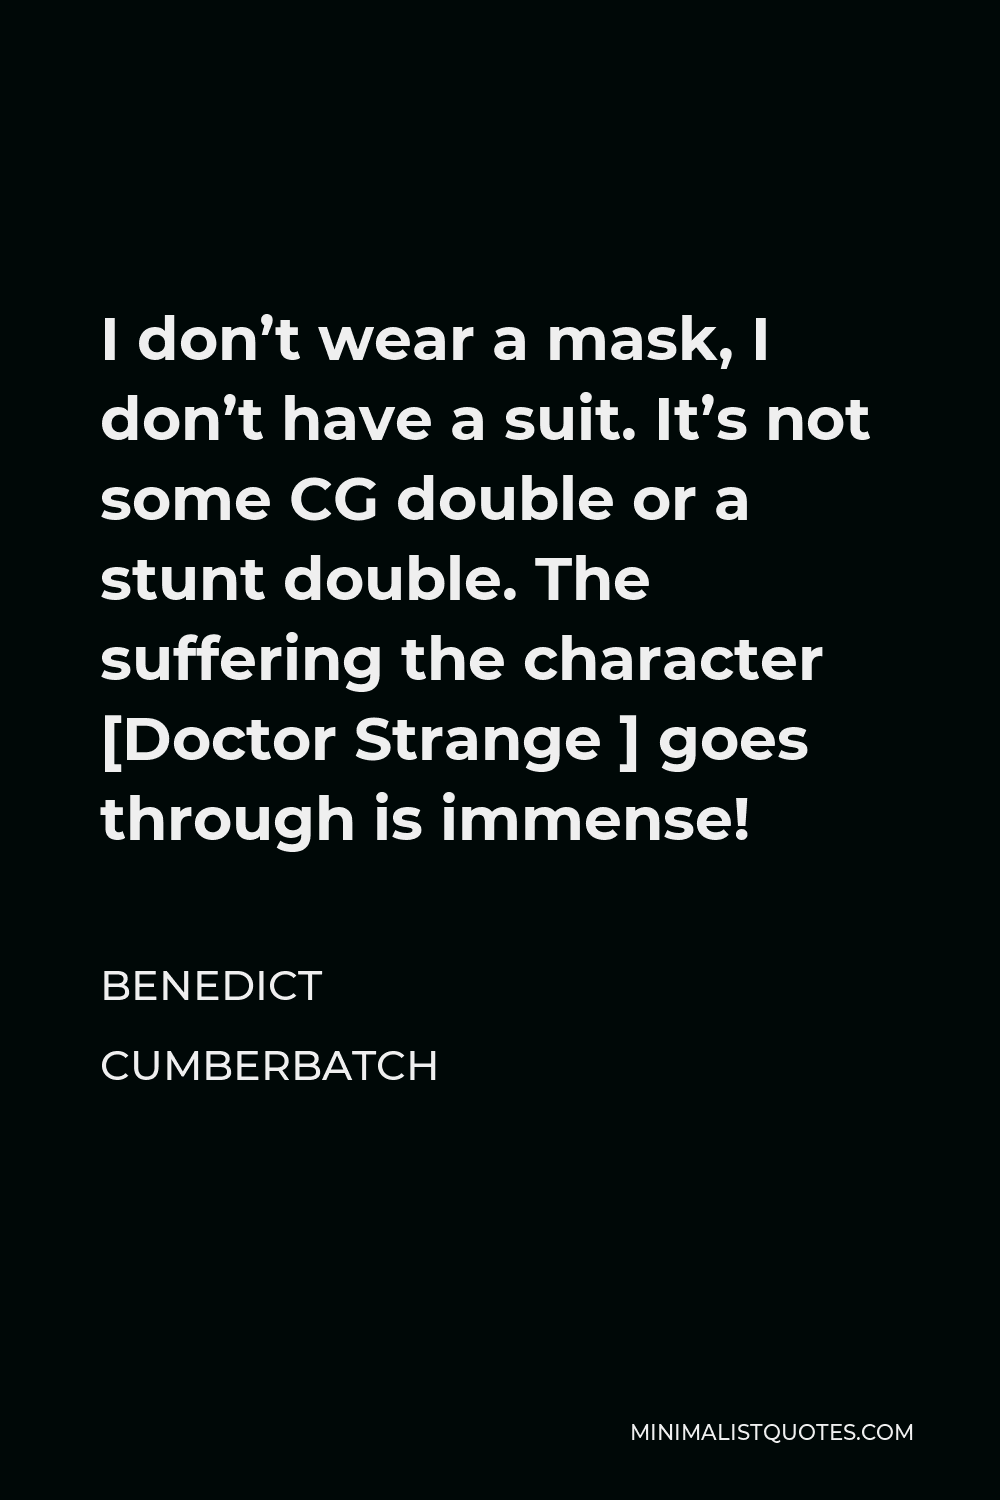 Benedict Cumberbatch Quote - I don’t wear a mask, I don’t have a suit. It’s not some CG double or a stunt double. The suffering the character [Doctor Strange ] goes through is immense!